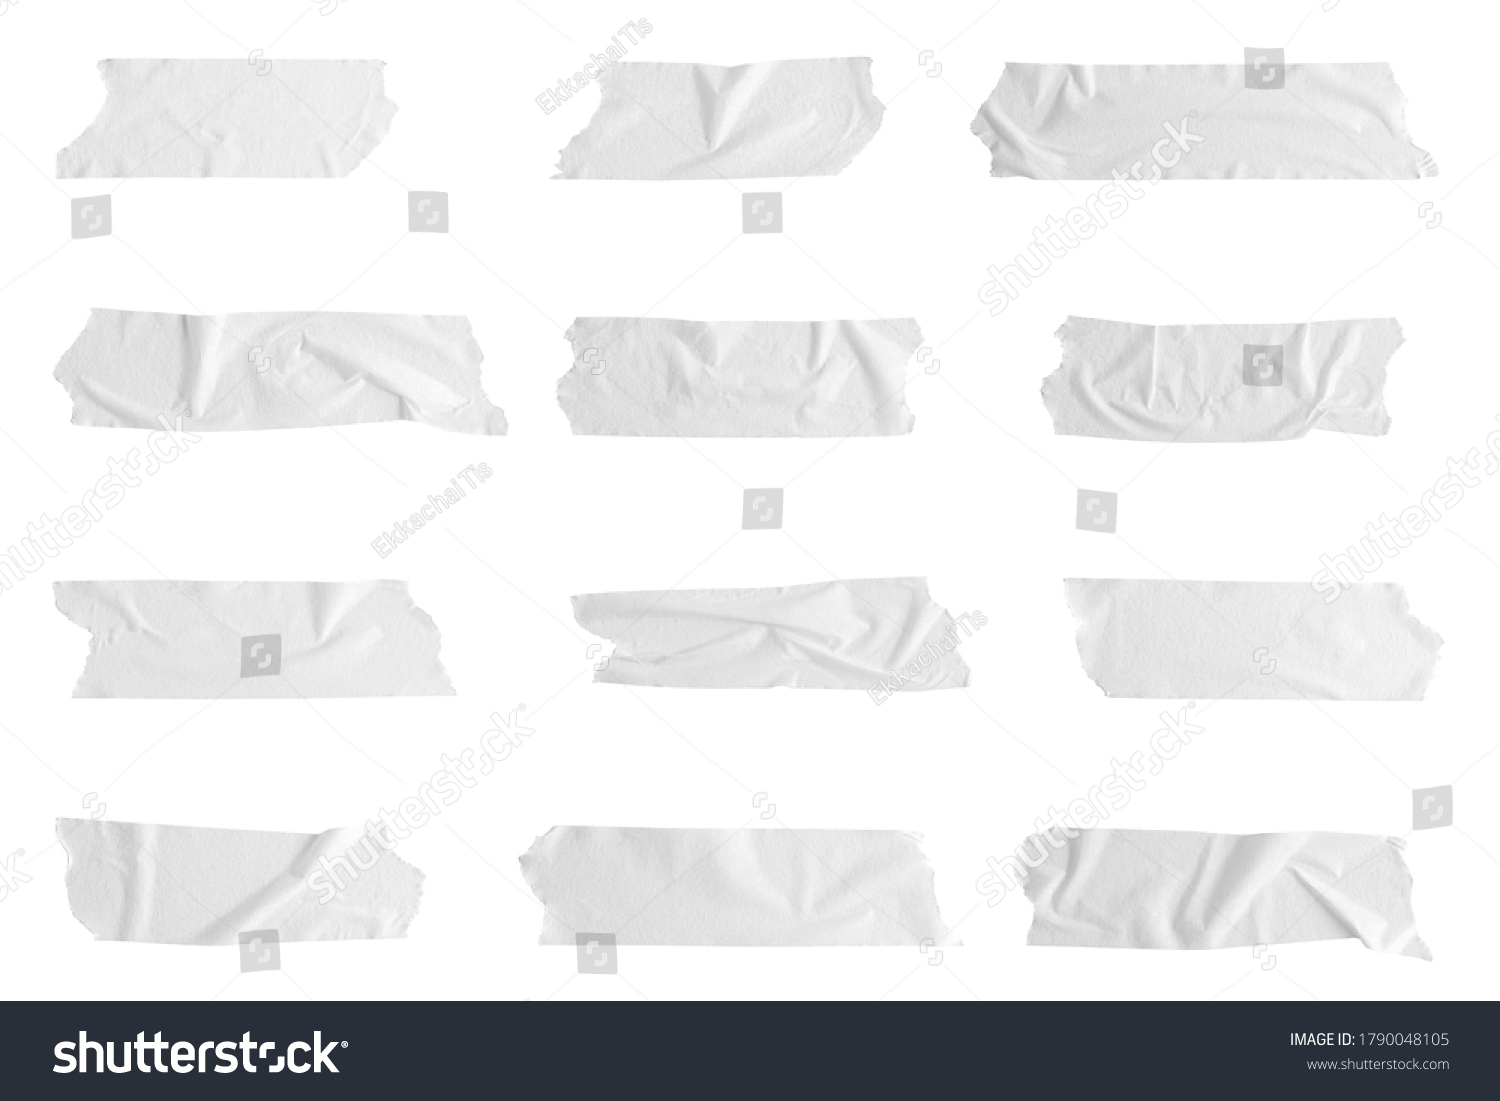 Realistic adhesive tape collection. Sticky scotch tape of different sizes isolated on white background. #1790048105